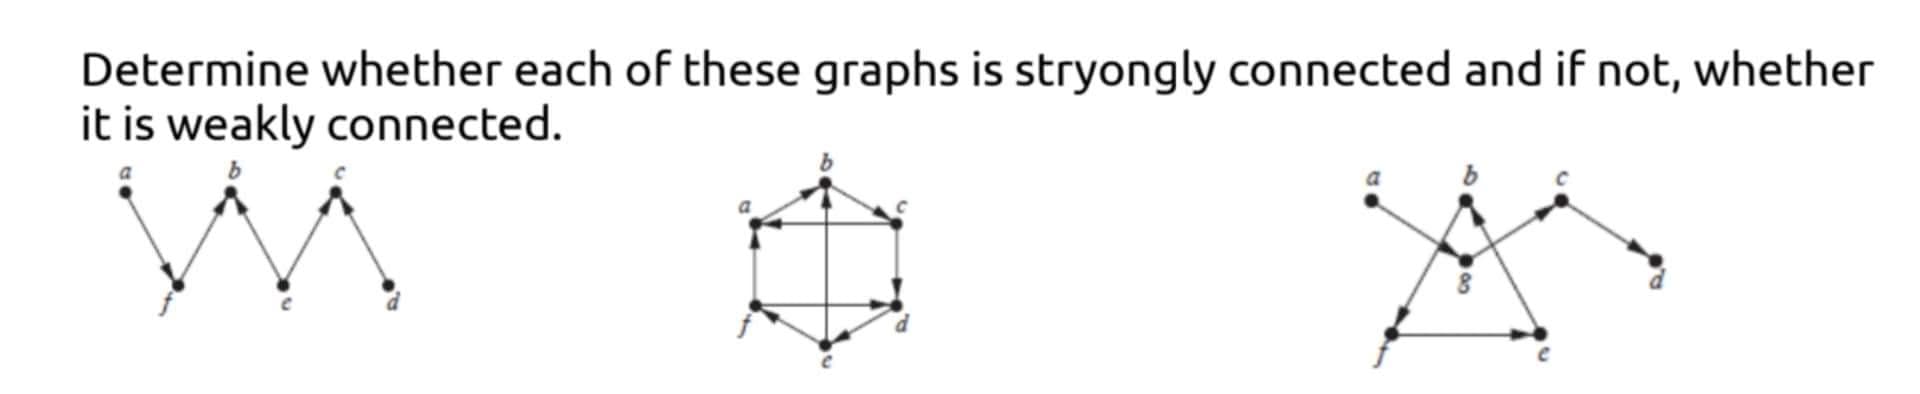 Determine whether each of these graphs is stryongly connected and if not, whether
it is weakly connected.
